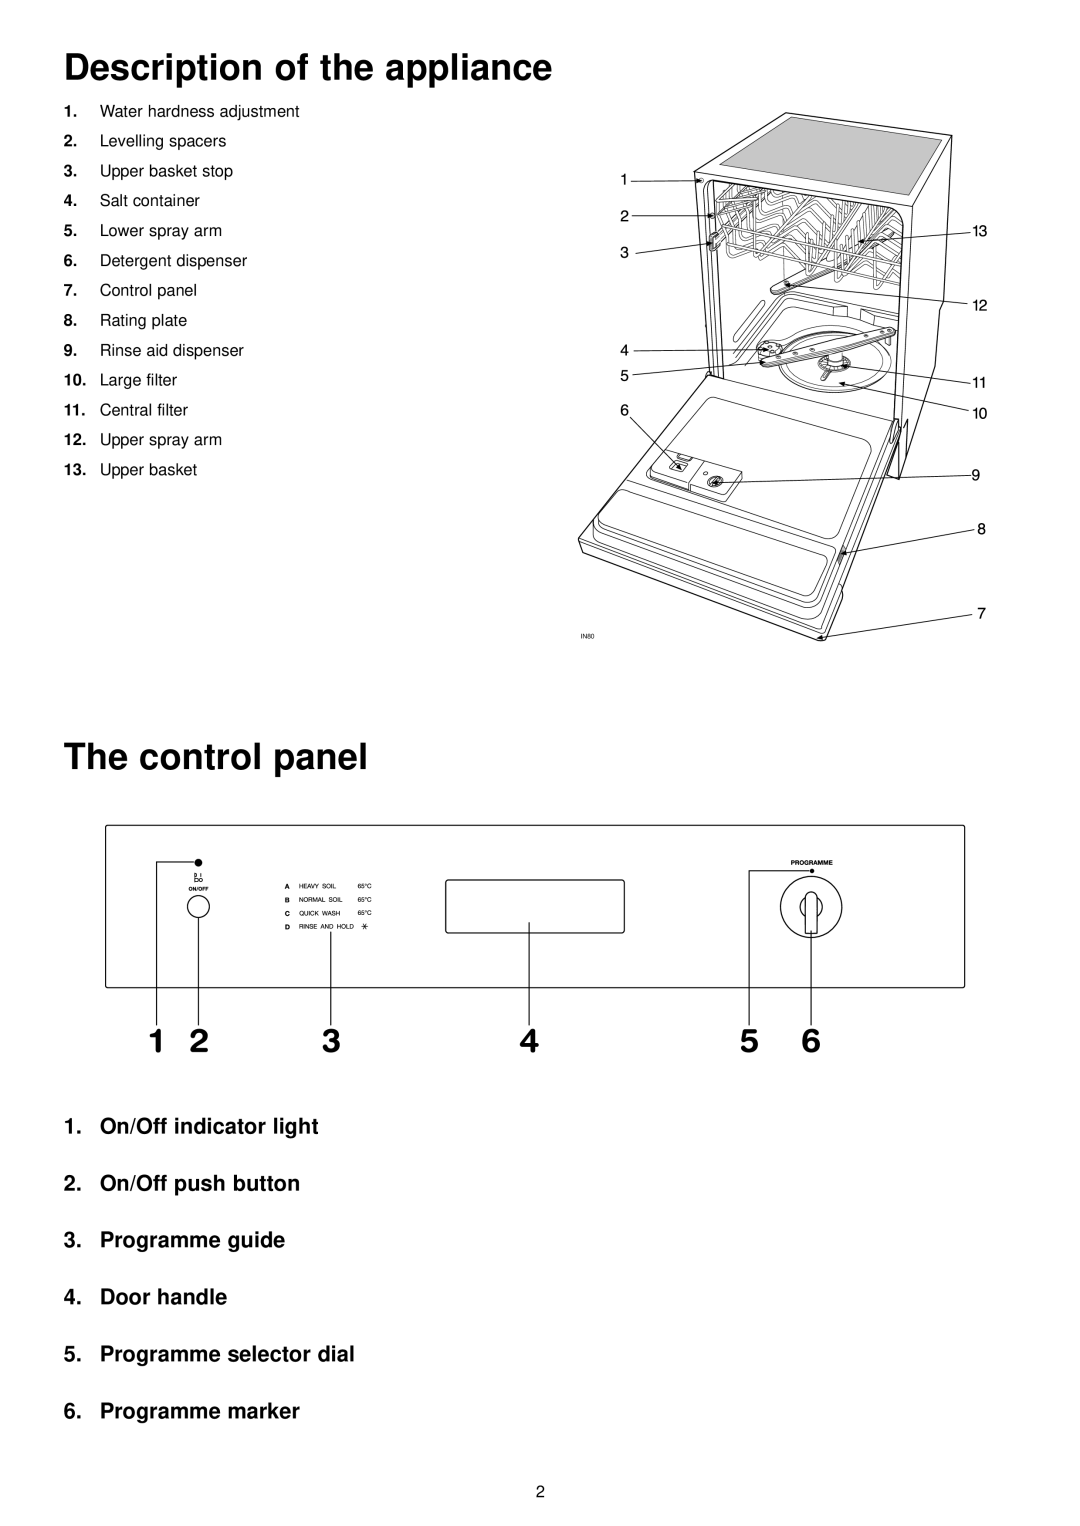 Zanussi ZDI 6041 manual Description of the appliance, The control panel, 1.On/Off indicator light 2.On/Off push button 